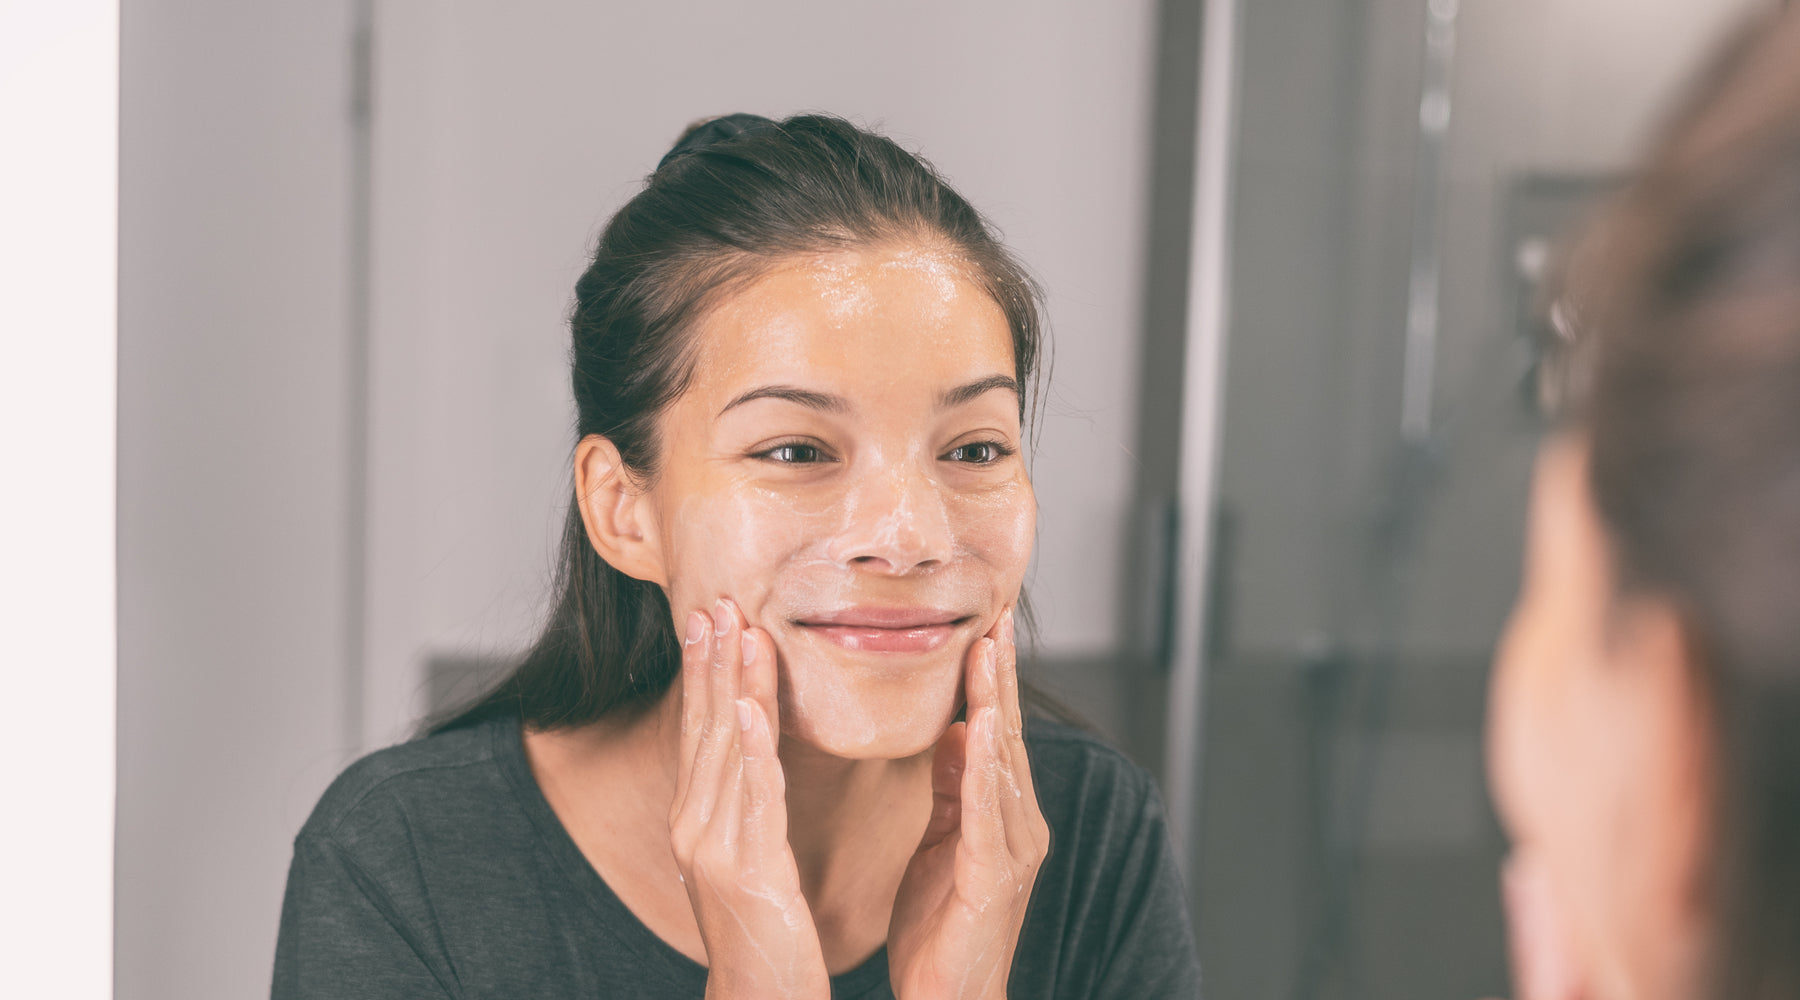 5 Reasons to Switch to Natural Skincare